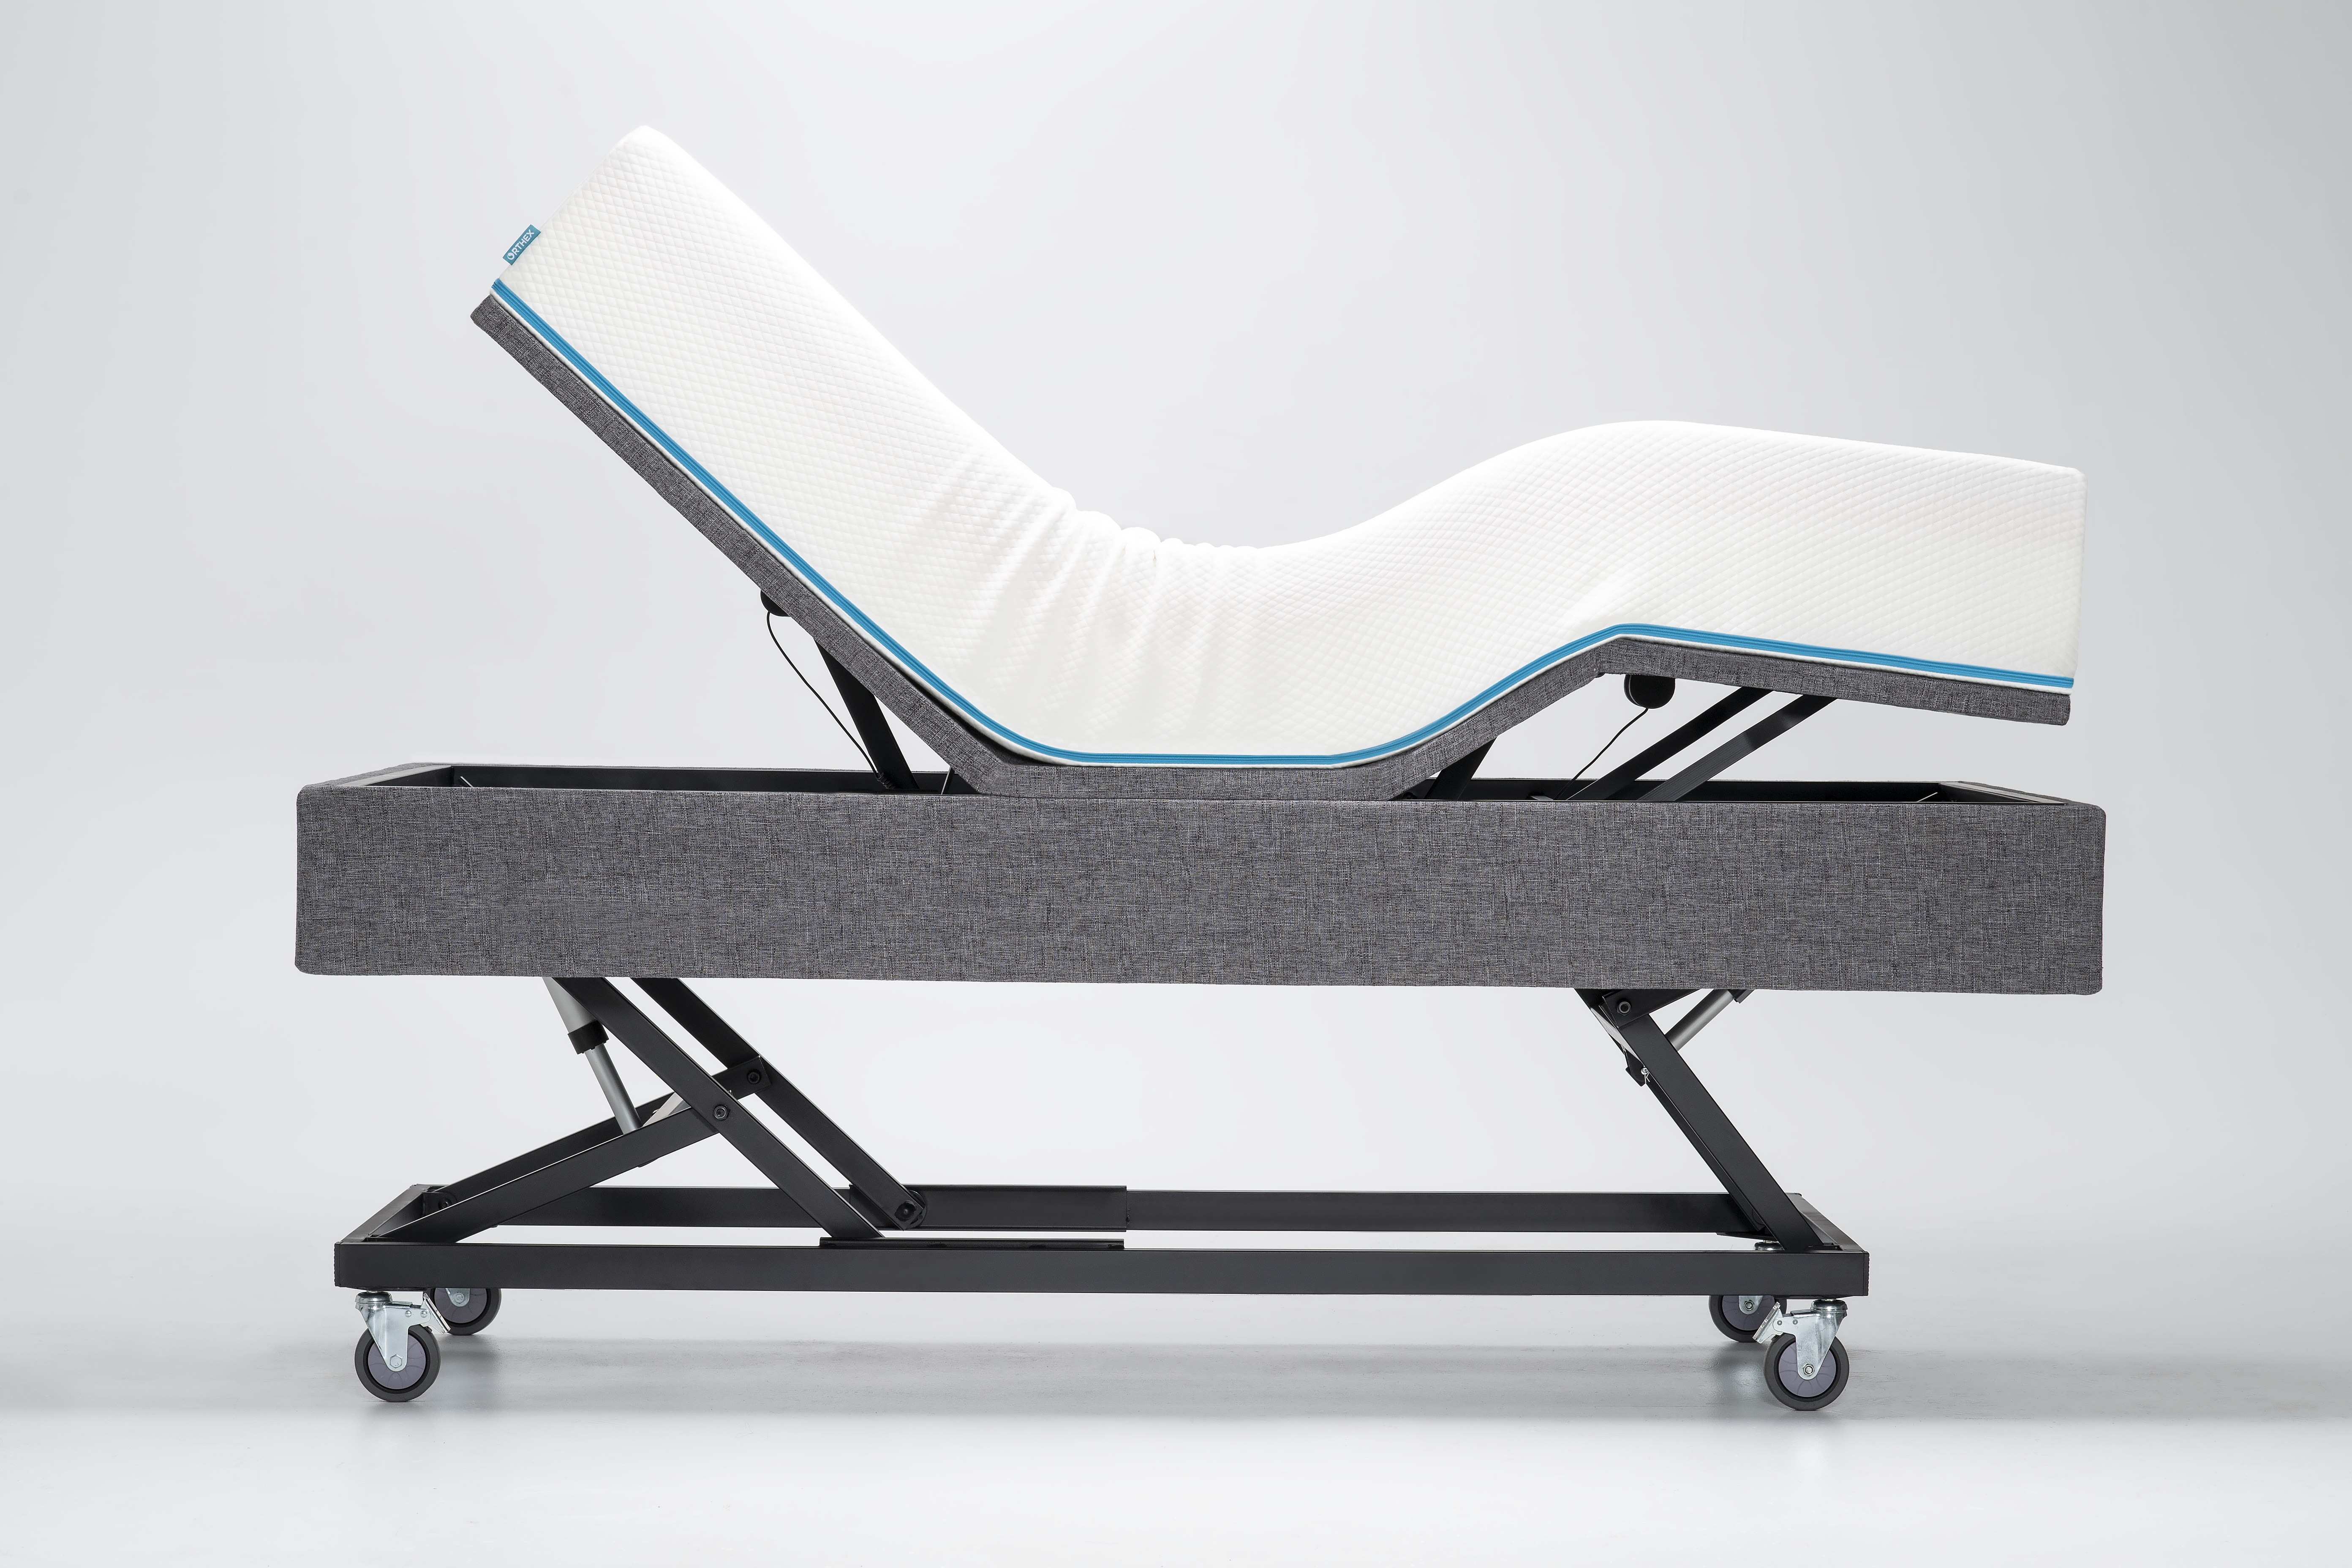 Multi-positions adjustable bed